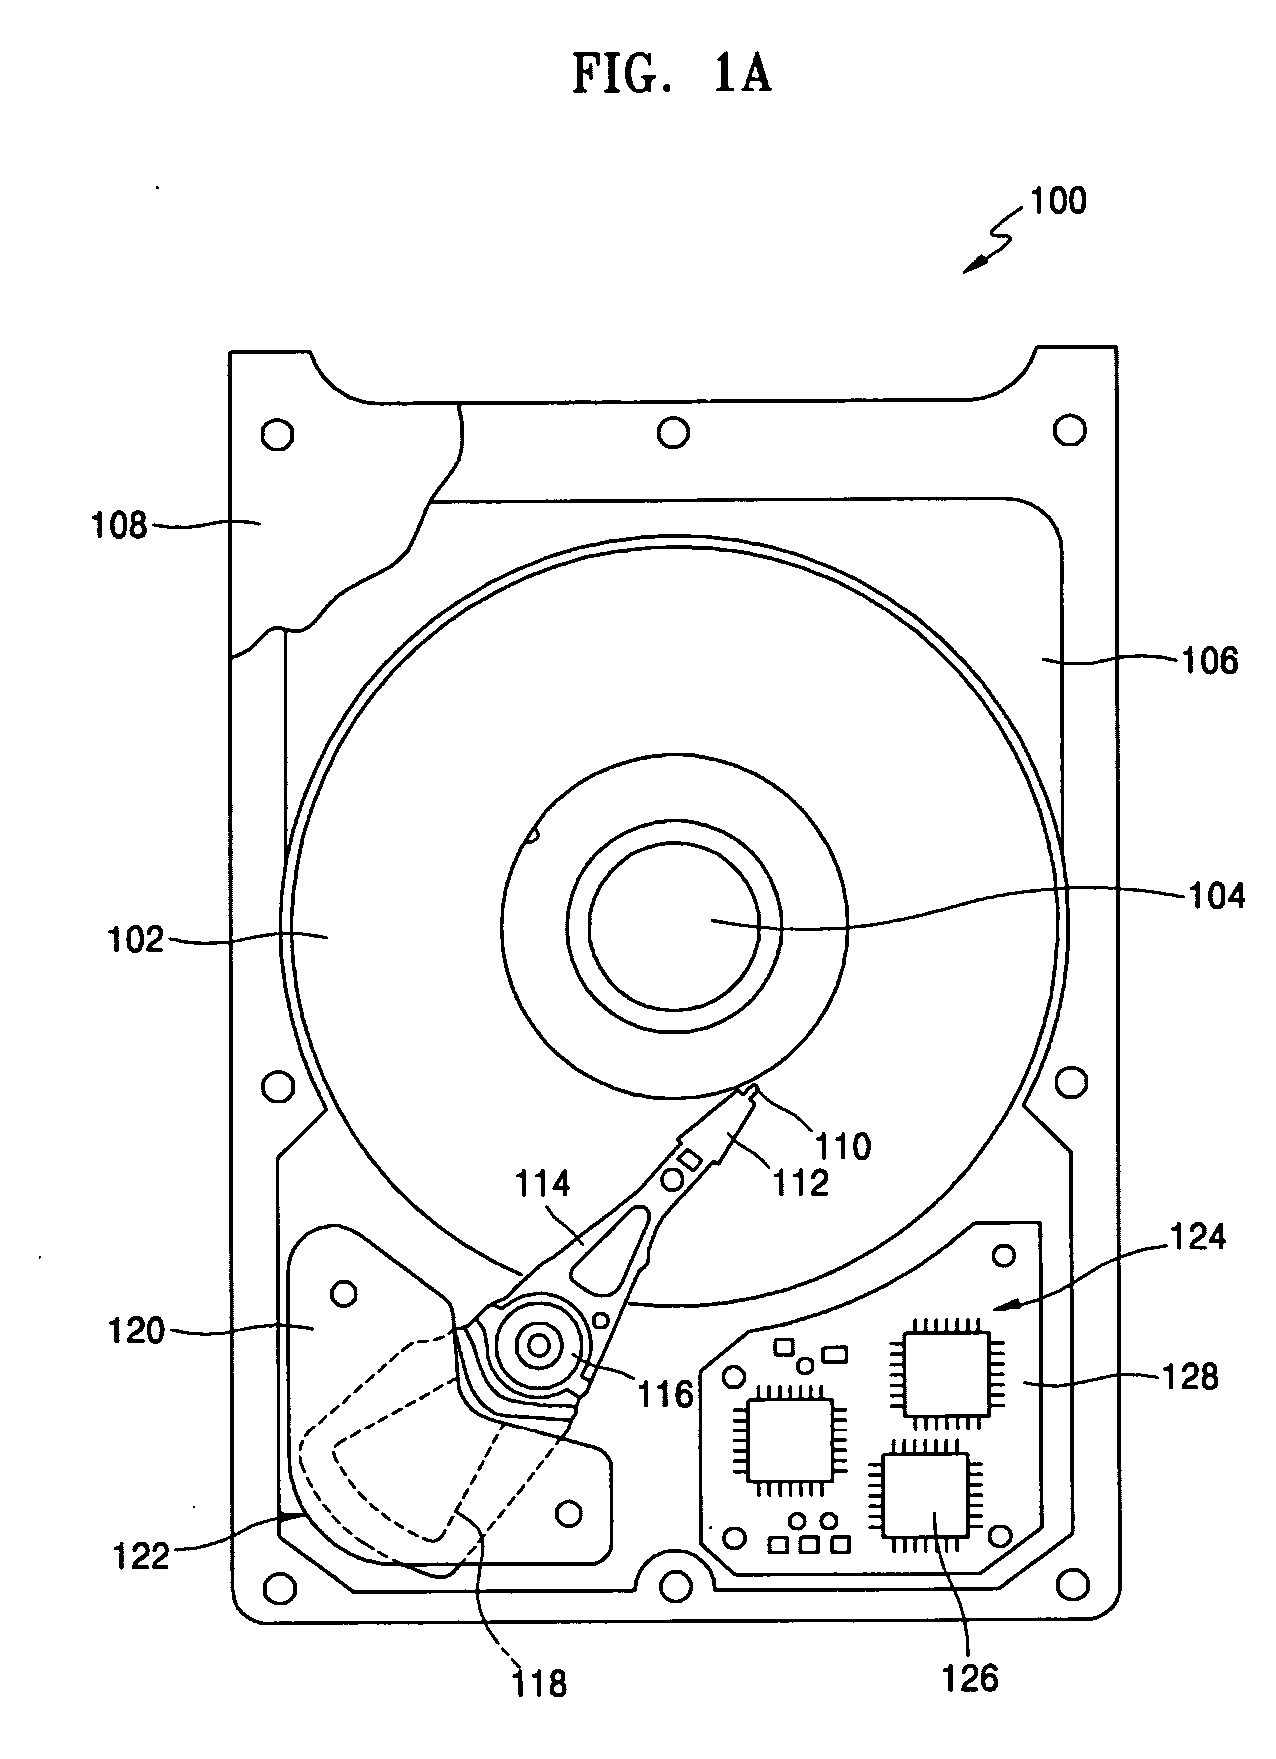 Method, medium, and apparatus transforming addresses of discs in a disc drive